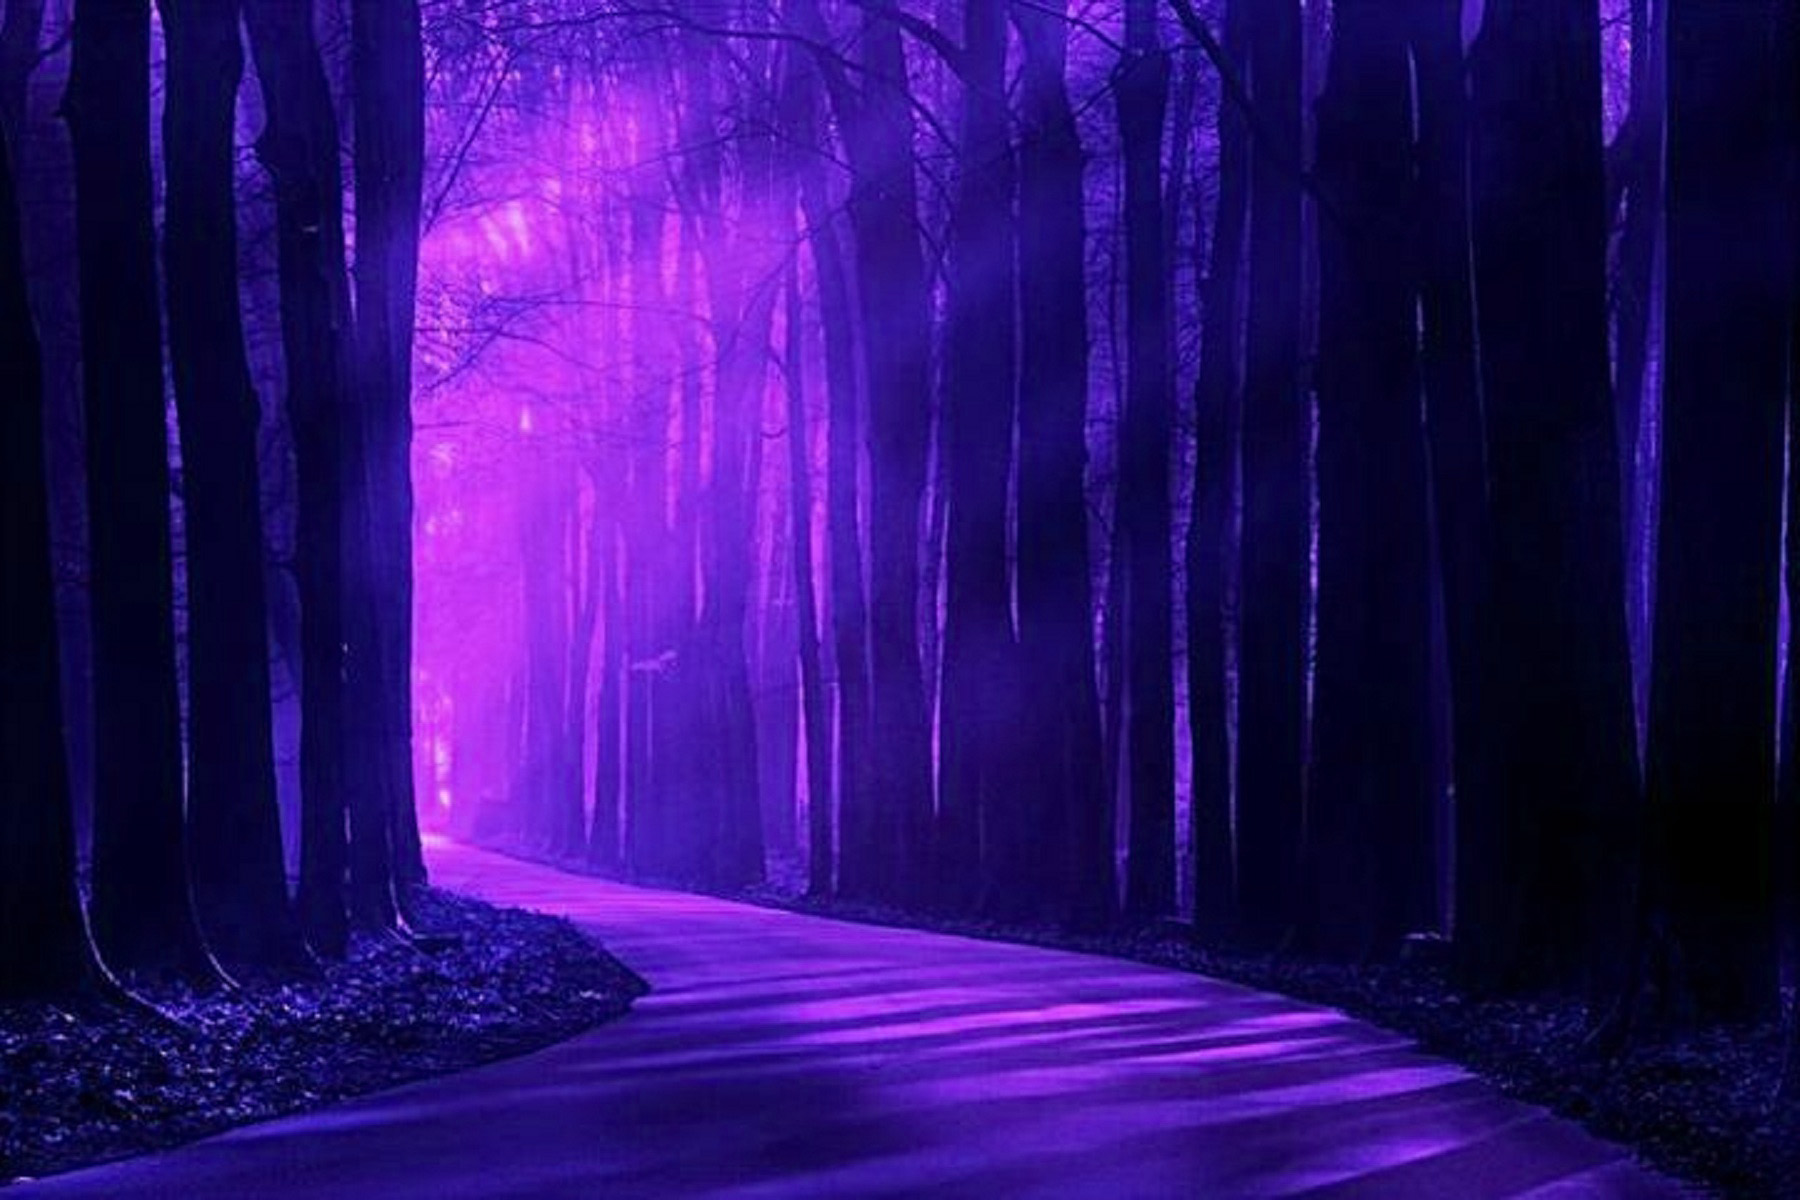 Lavender Forest Wallpaper and HD Background free download on PicGaGa